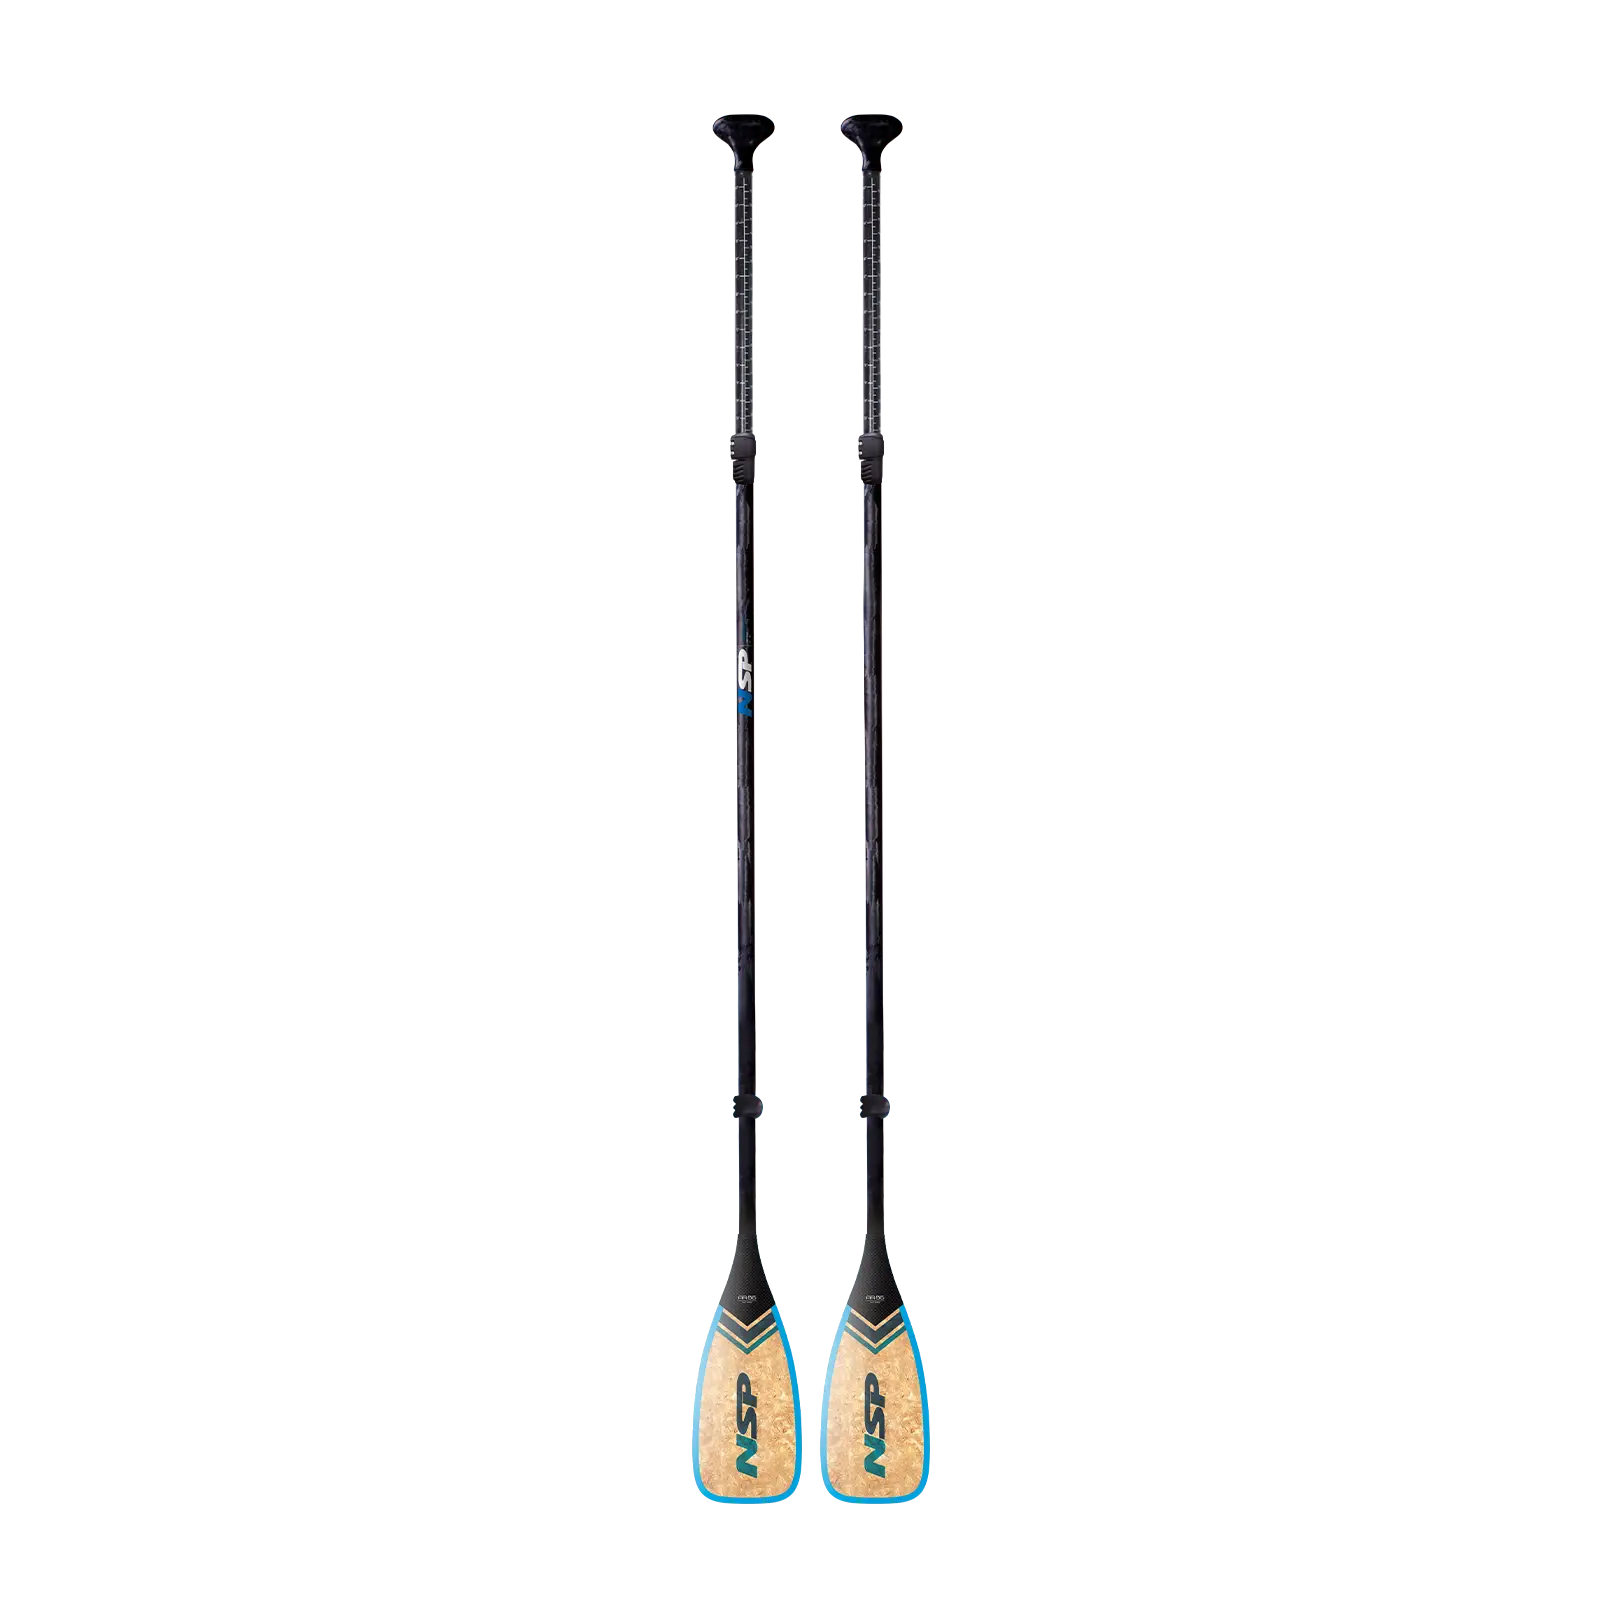 NSP Allround Coco Carbon Hybrid Adjustable 86 in | three-piece   NSP Europe